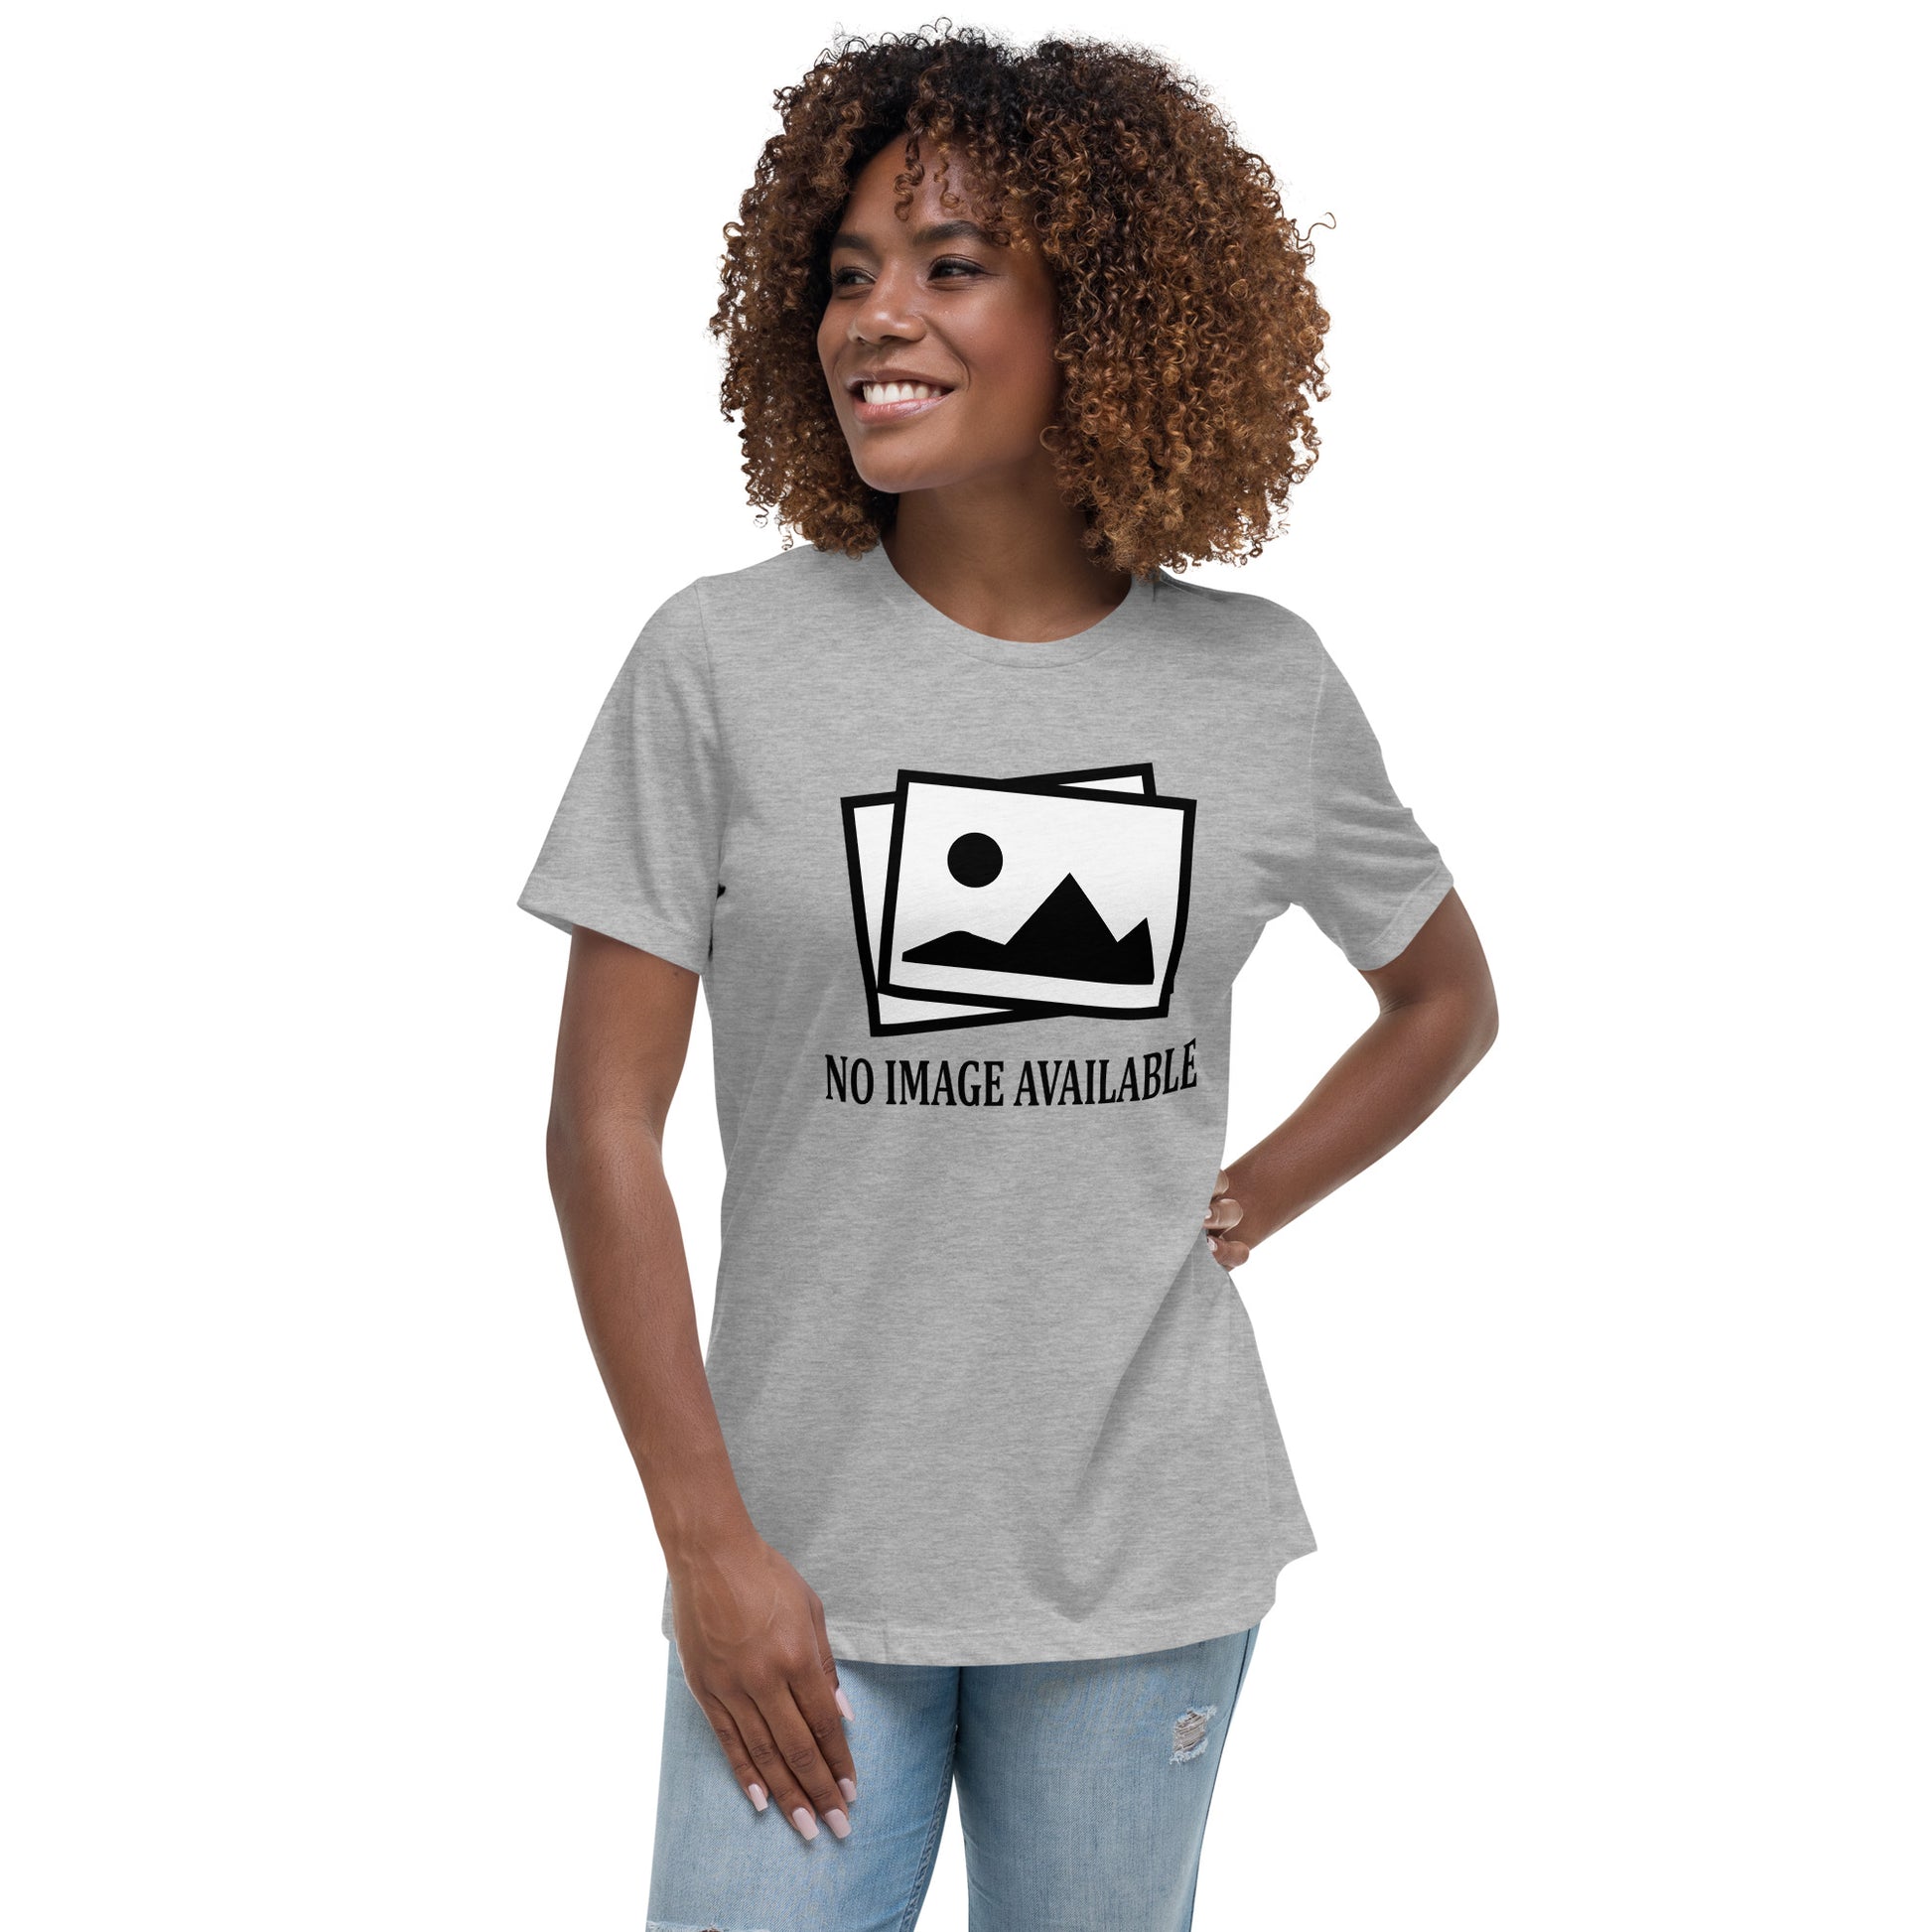 Women with grey t-shirt with image and text "no image available"